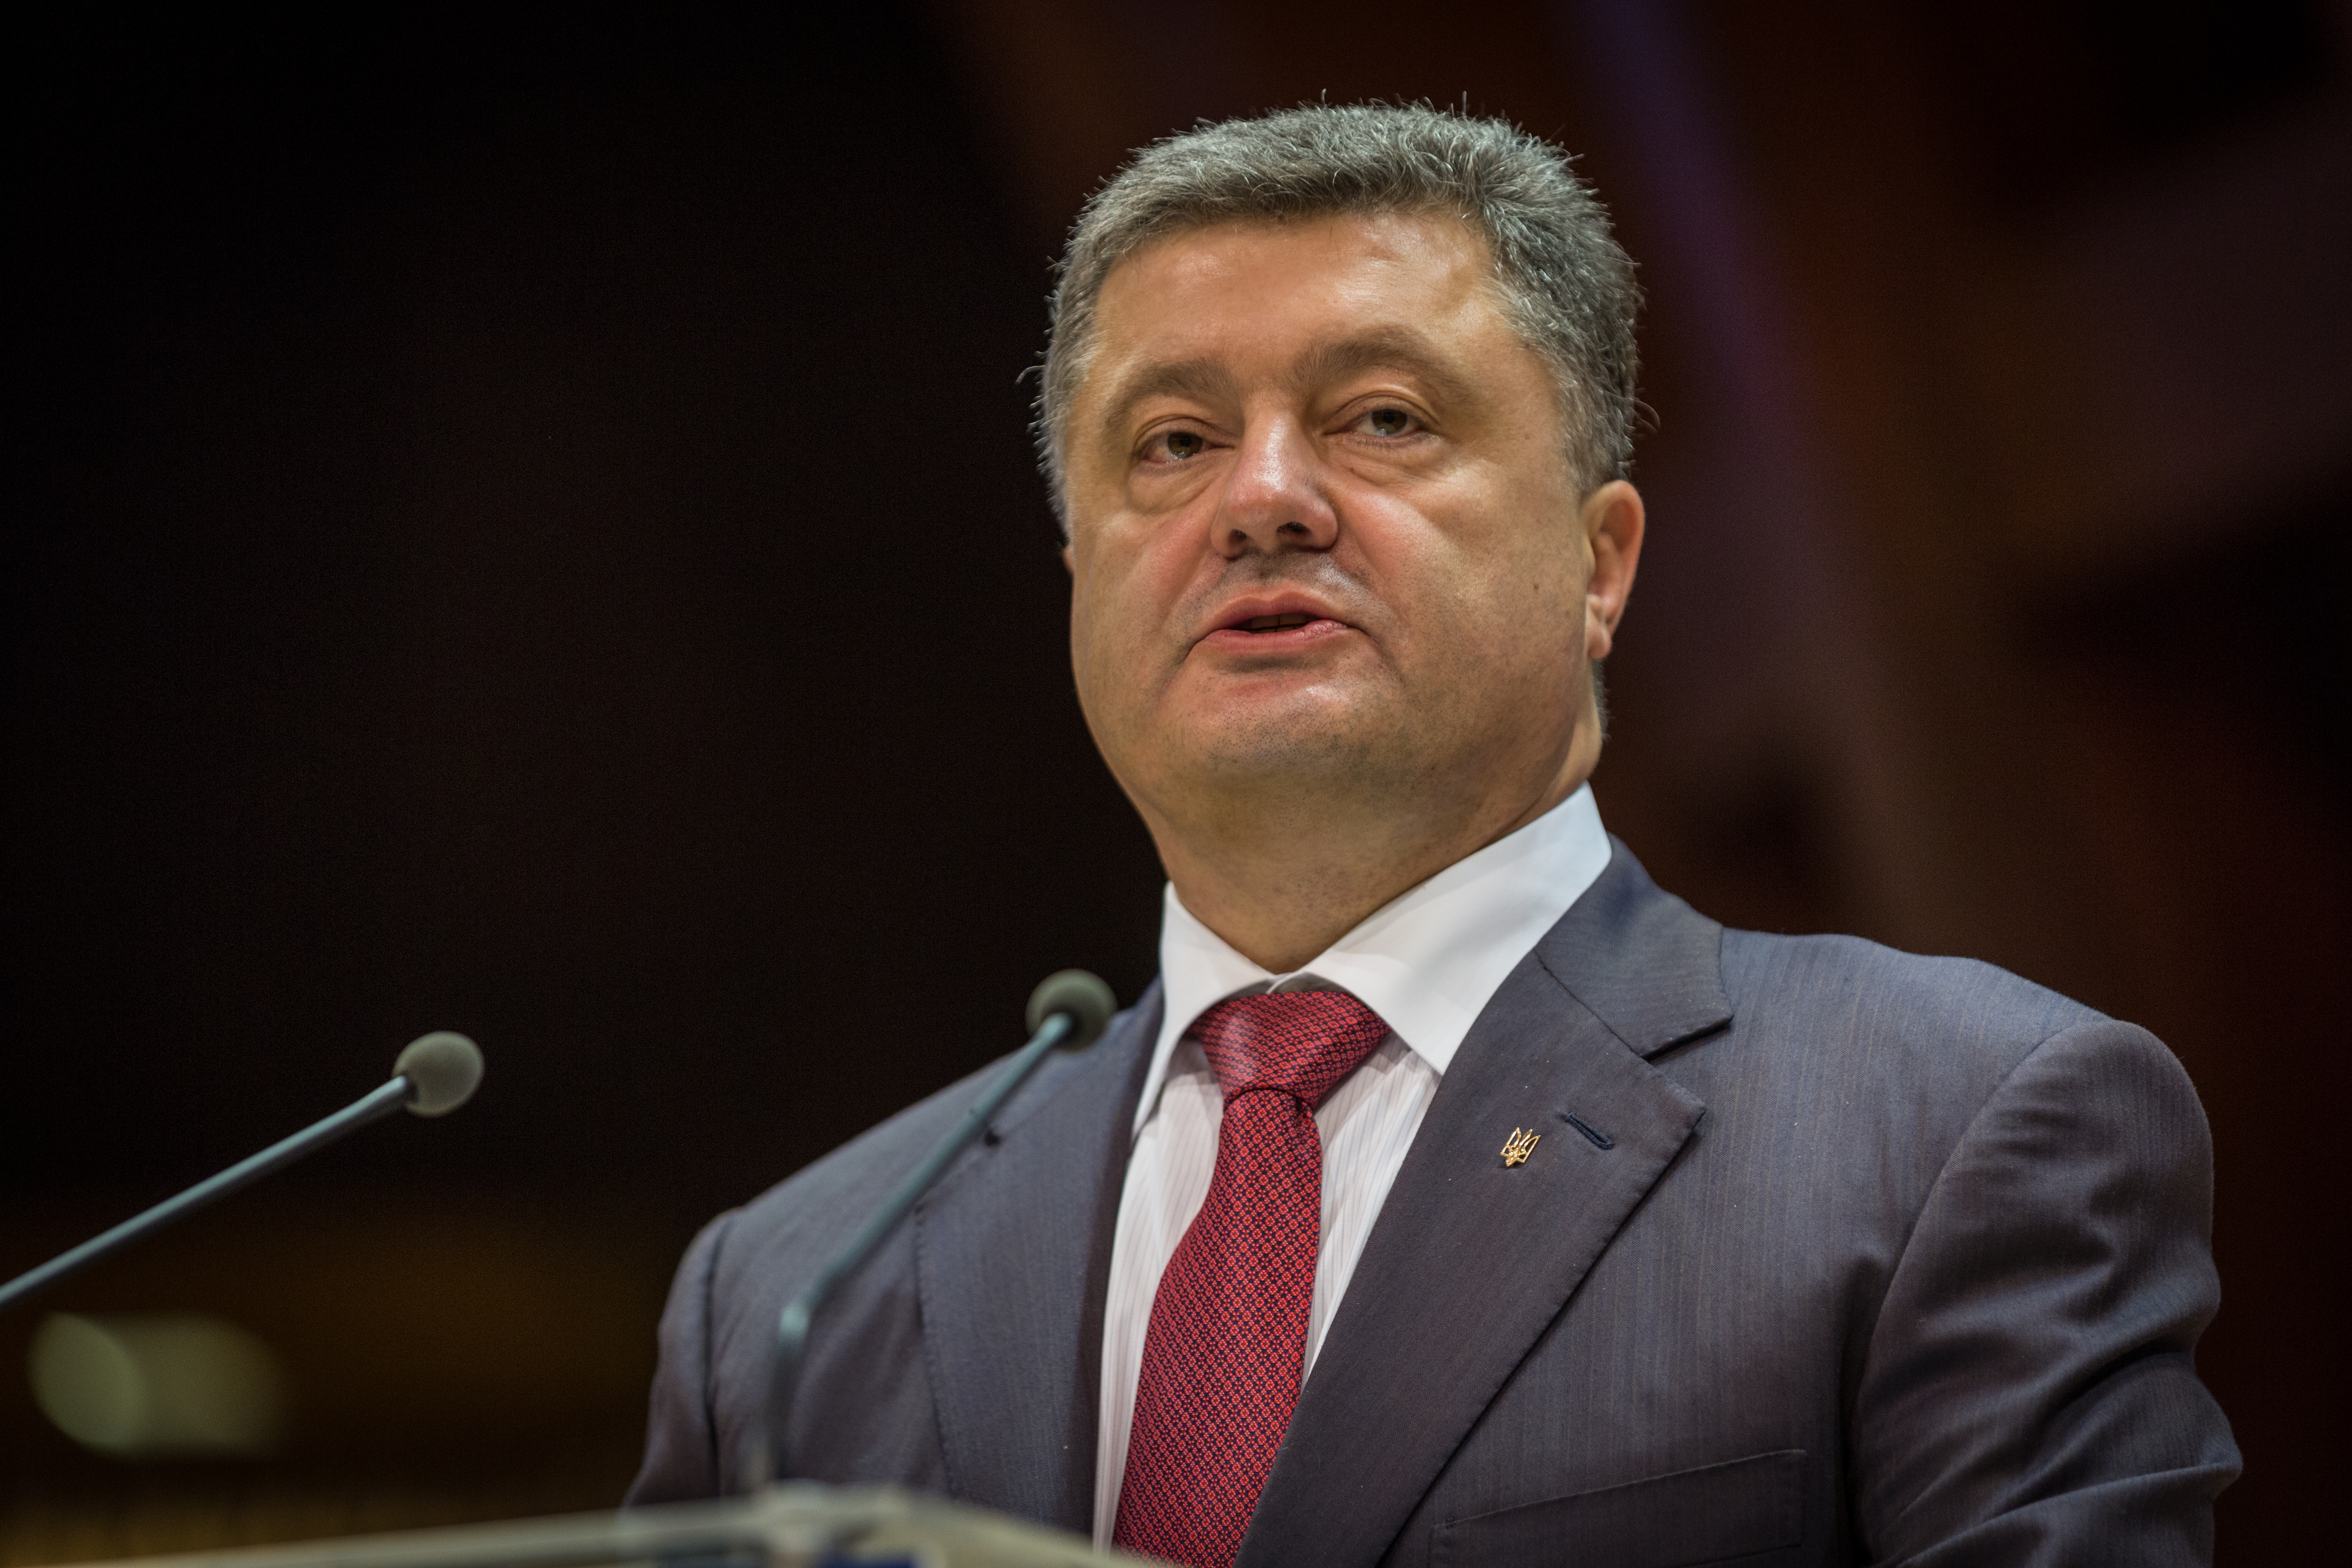 Ukraine president calls for martial law amid escalating tensions with Russia